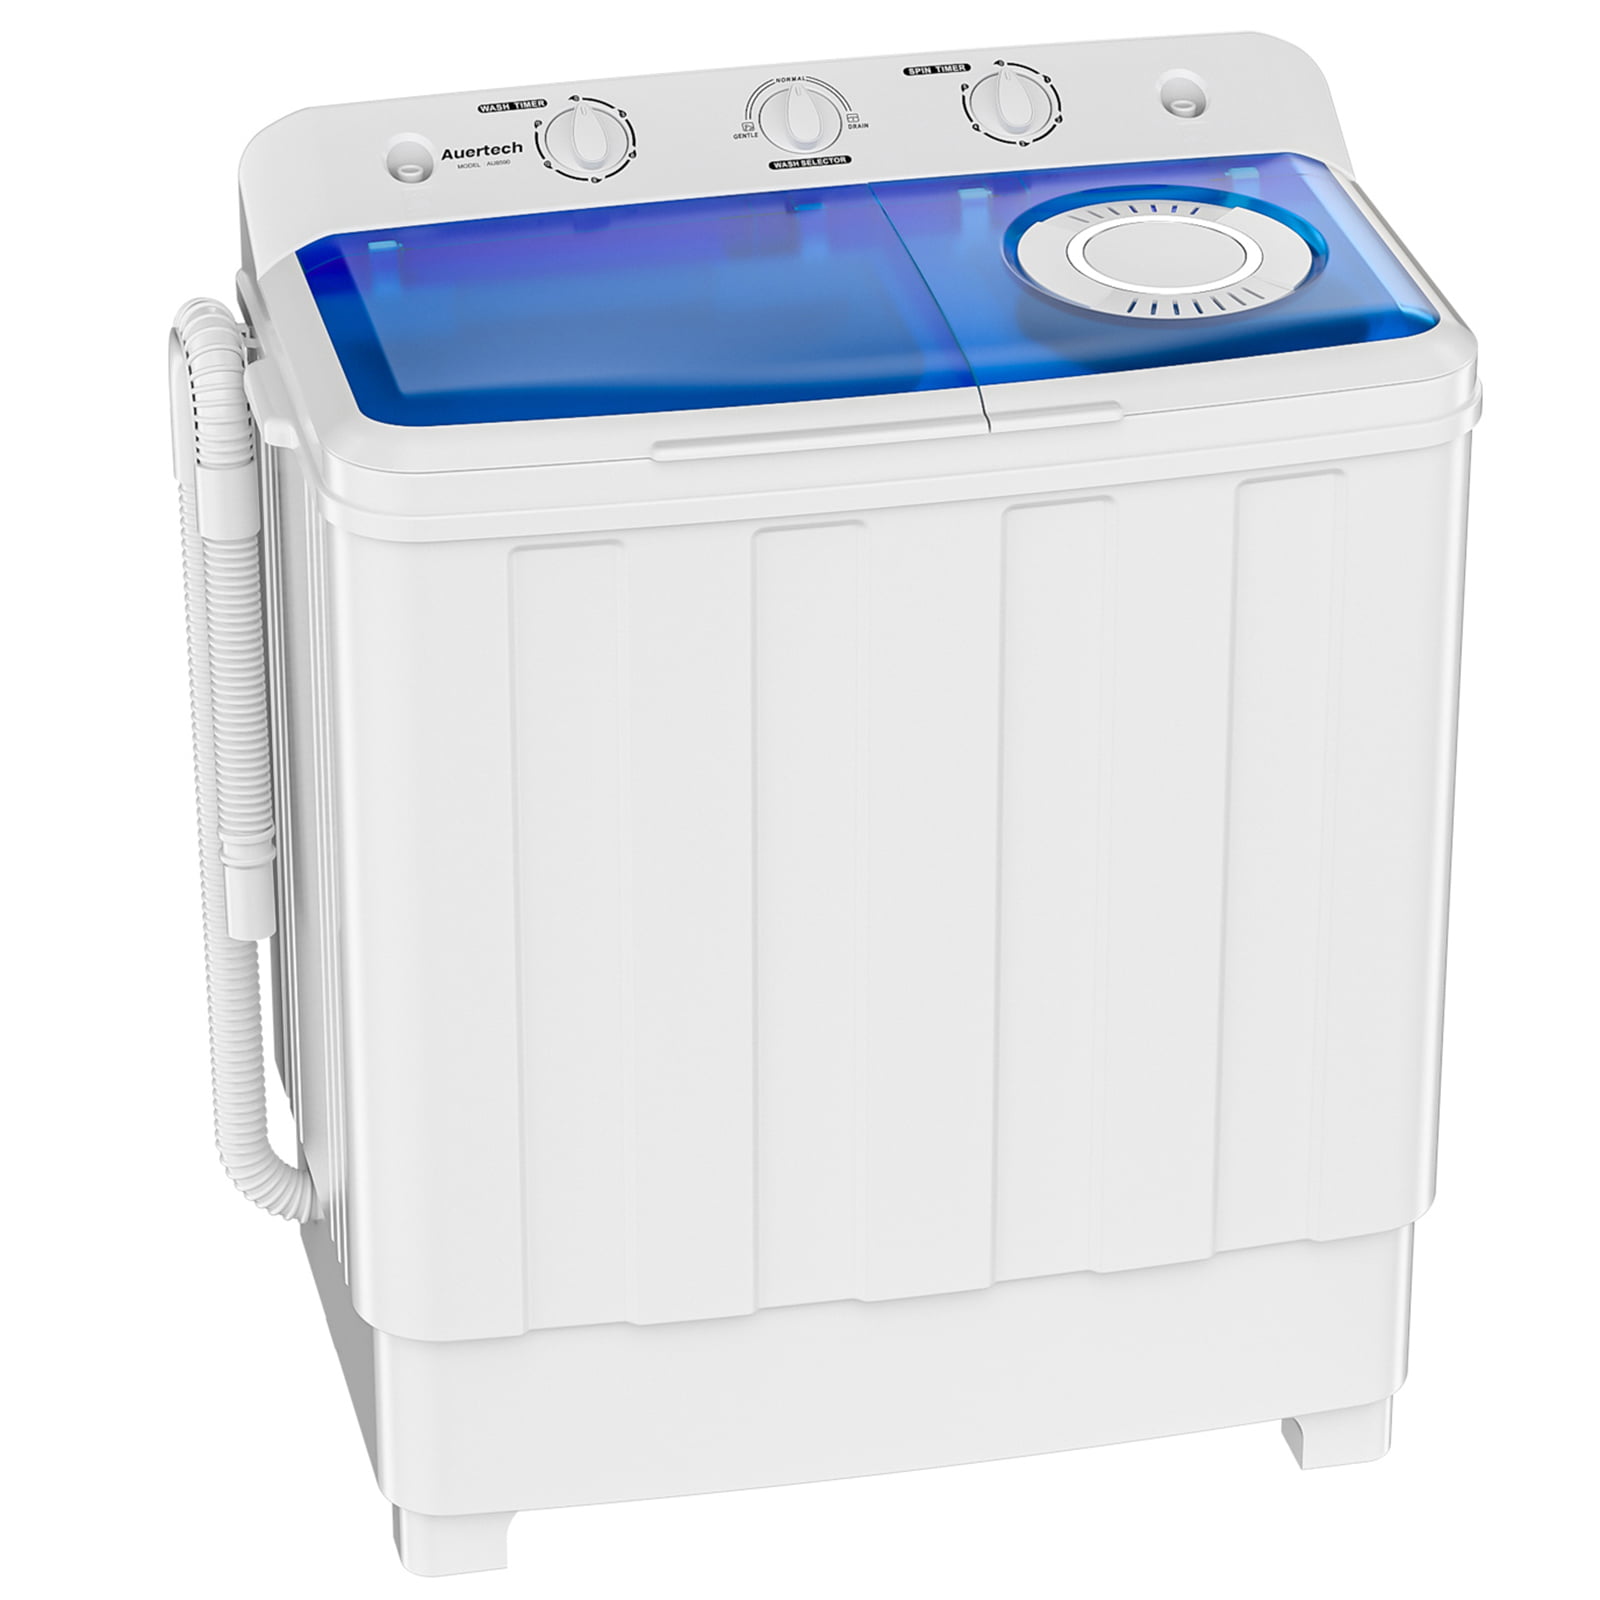 White & Blue Semi-Automatic Washing Machine ZOKOP XPB46-RS4 13Lbs Semi-automatic Plastic & PP & Stainless Steel Twin Tube Washing Machine With 2m Water Inlet & 2m Drain Pipe US Standard